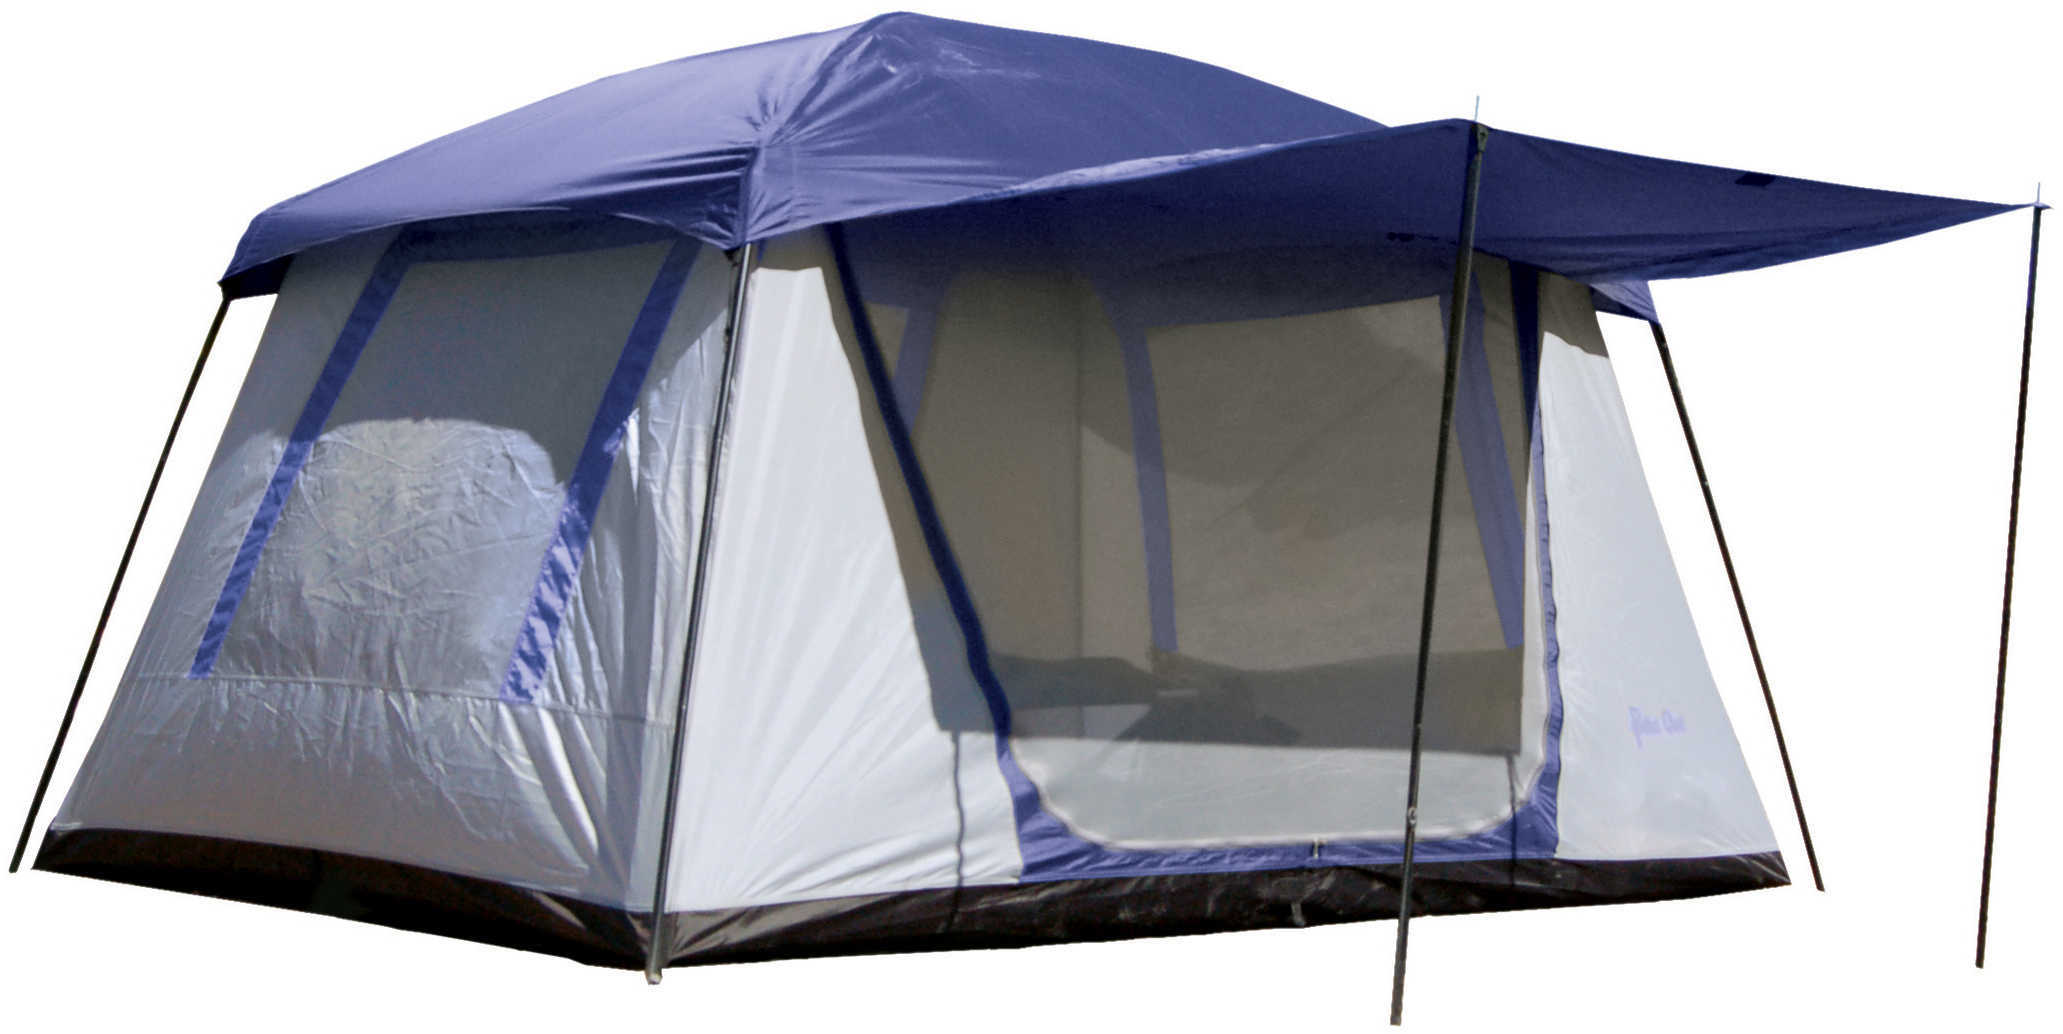 PahaQue Green Mountain 5XD Tent - Blue Md: GM200